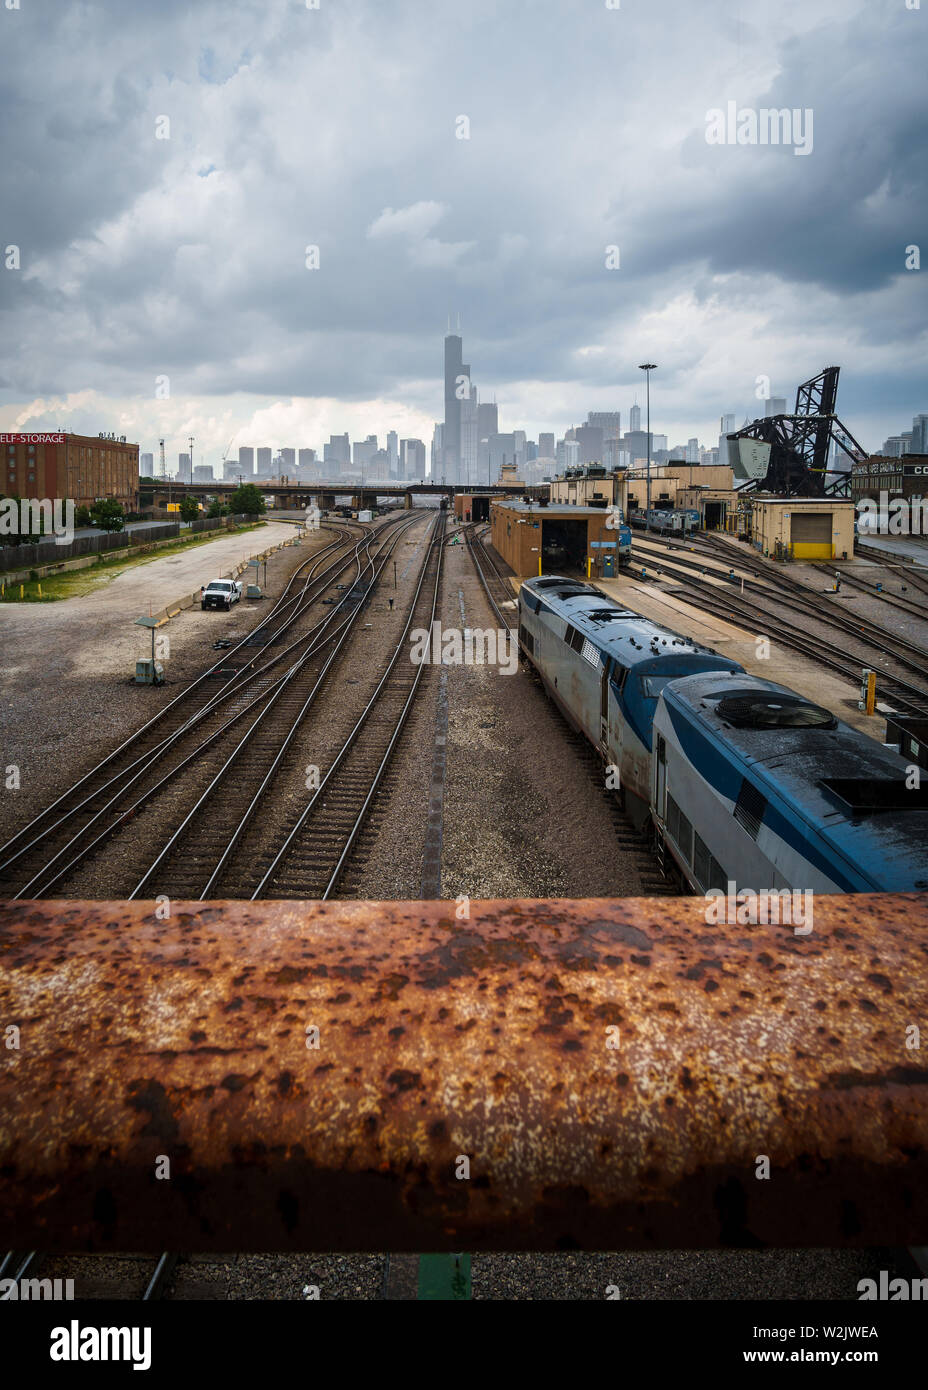 A gritty view of the Chicago skyline Stock Photo